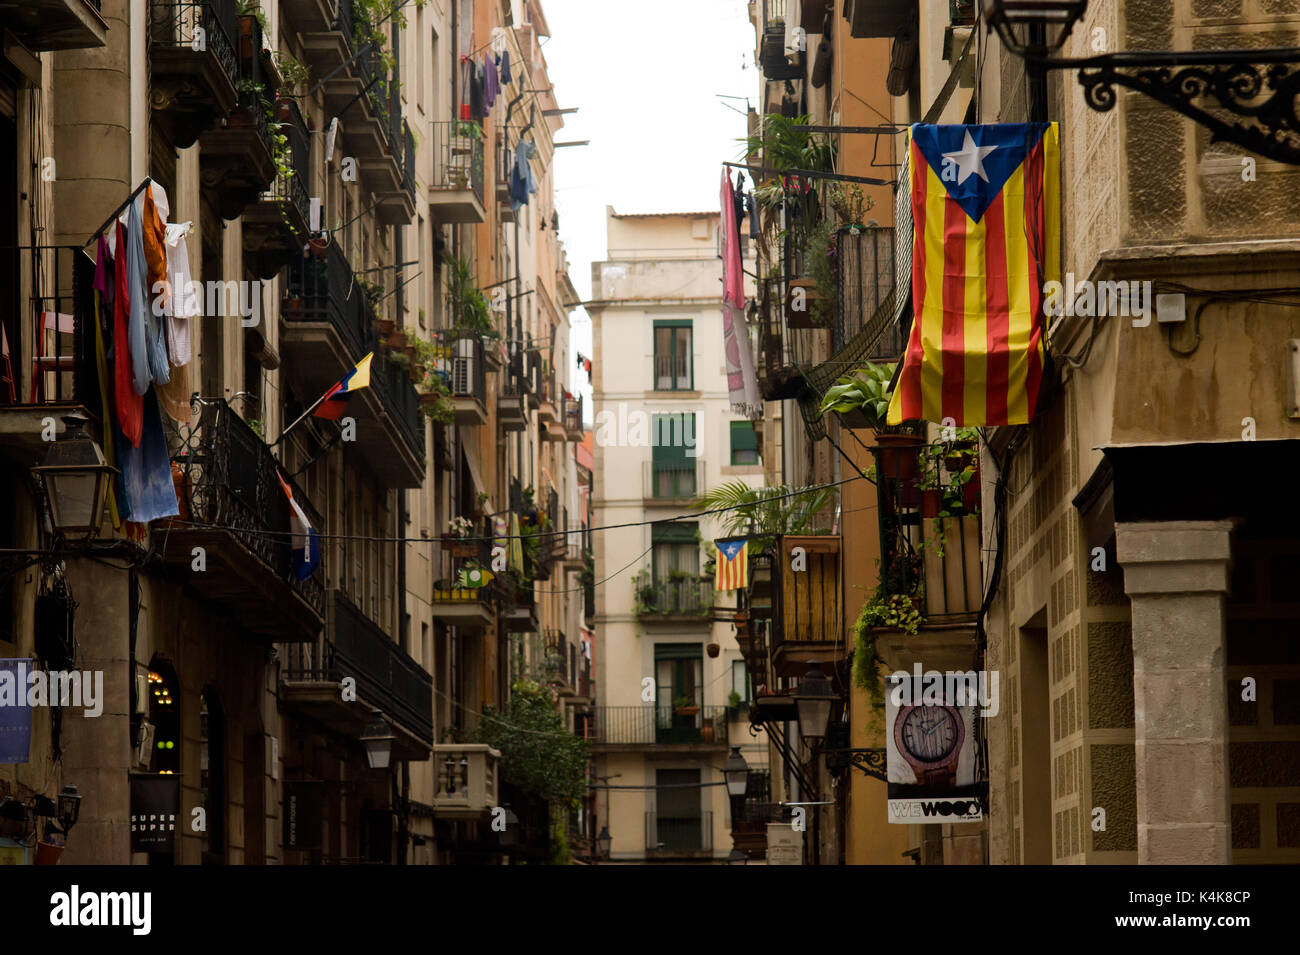 Barcelona, Spain. 06th Sep, 2017. September 6, 2017 - Barcelona, Catalonia, Spain - A estelada flag (symbol of Catalan independence) hangs from a balcony in Barcelona. The Catalan Parliament has passed a law to call a referendum of independence the next first of October. The unionist forces of Catalonia and the Spanish government are frontally opposed to the referendum and consider it illegal. Credit: Jordi Boixareu/Alamy Live News Stock Photo